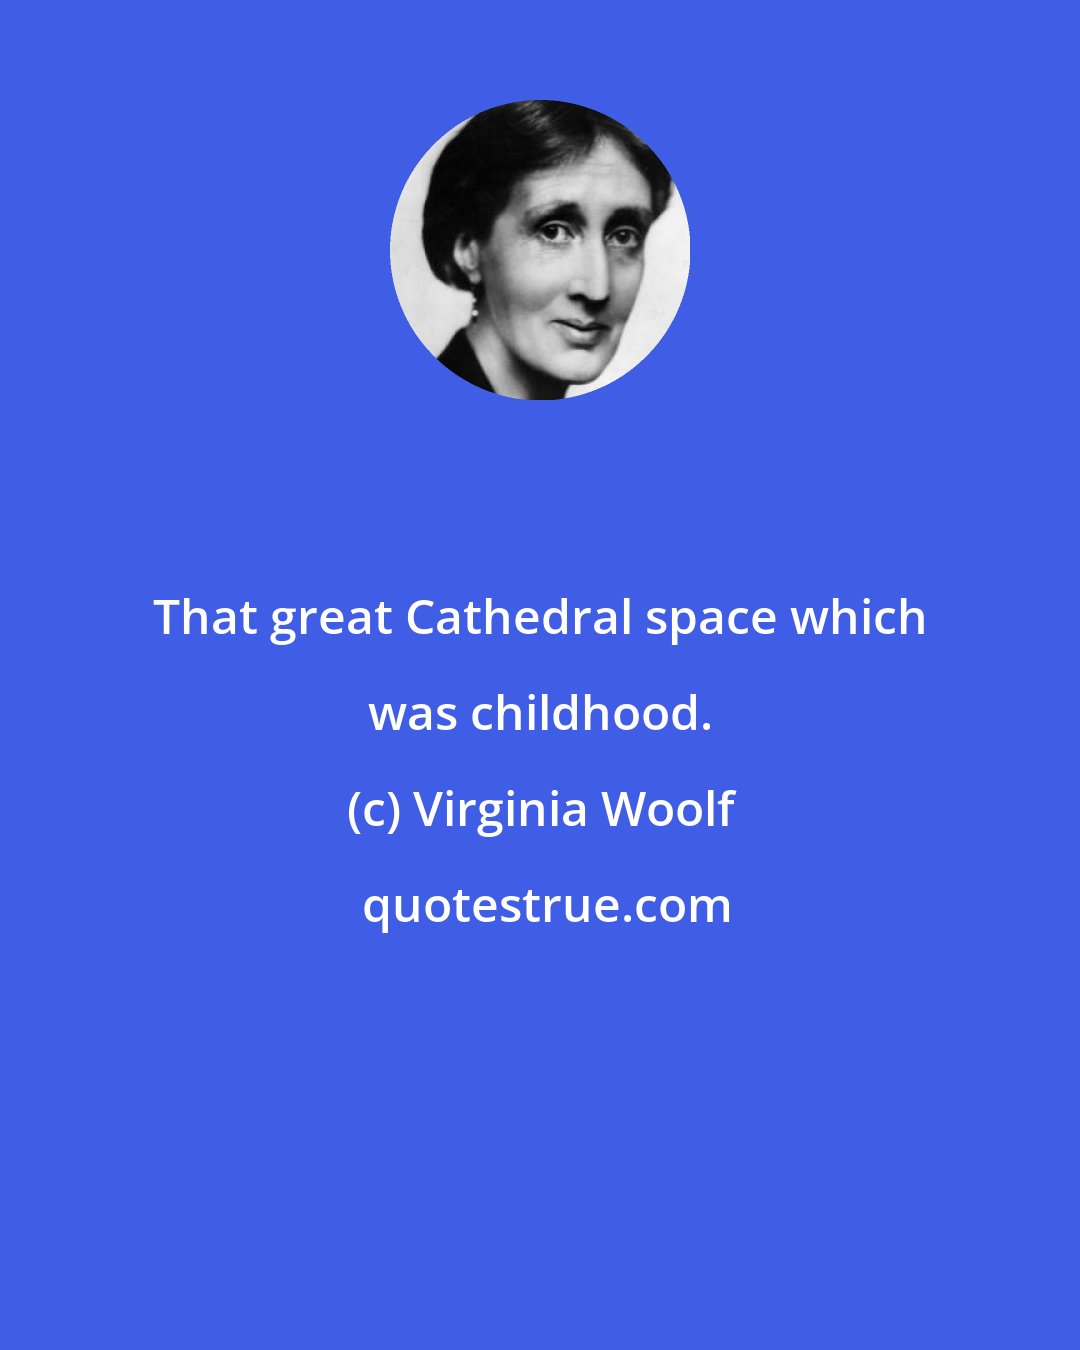 Virginia Woolf: That great Cathedral space which was childhood.